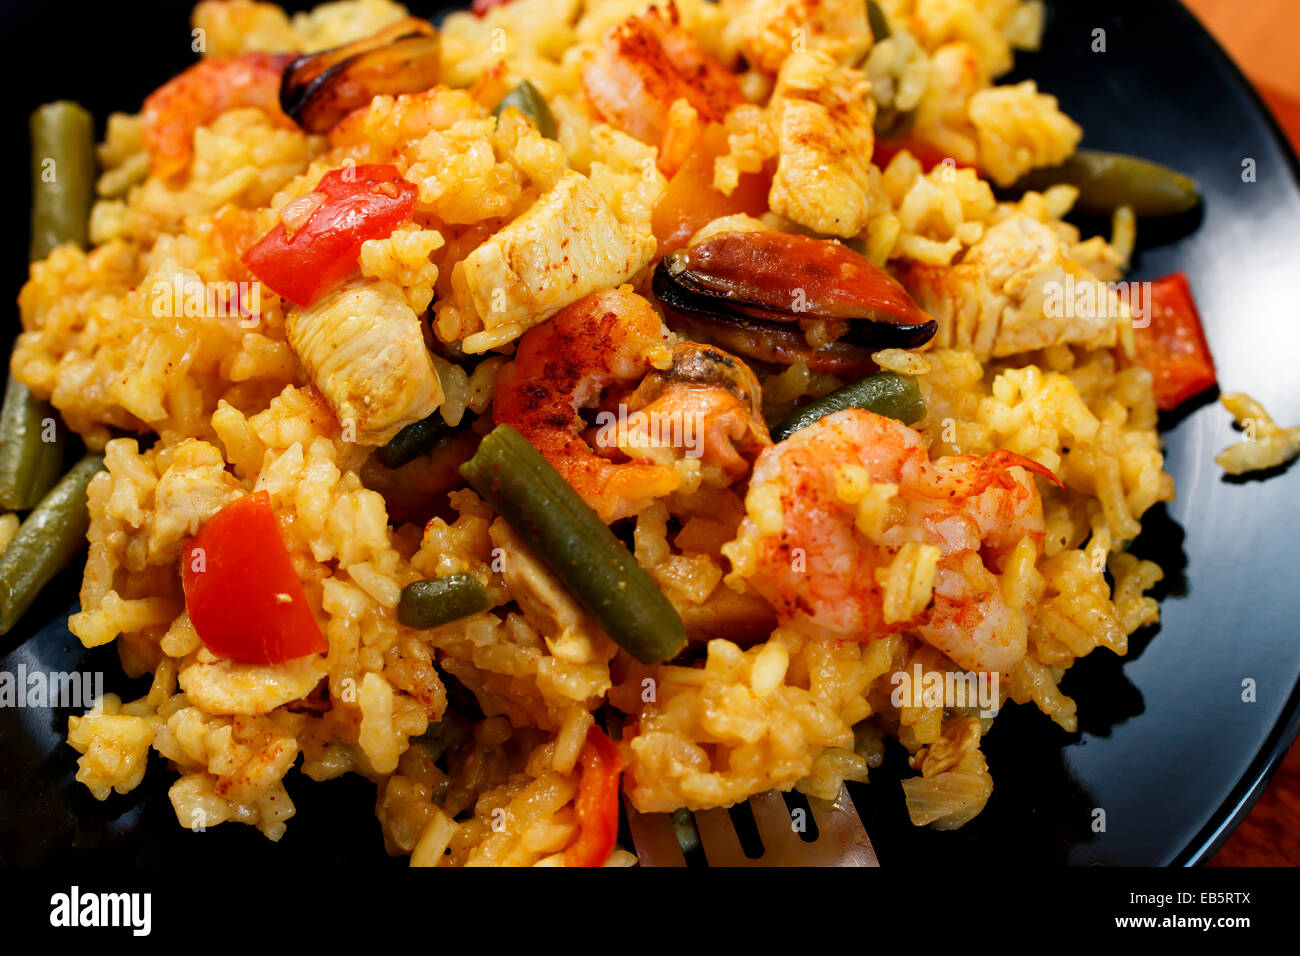 paella with shrimps and mussels on black plate, close-up Stock Photo